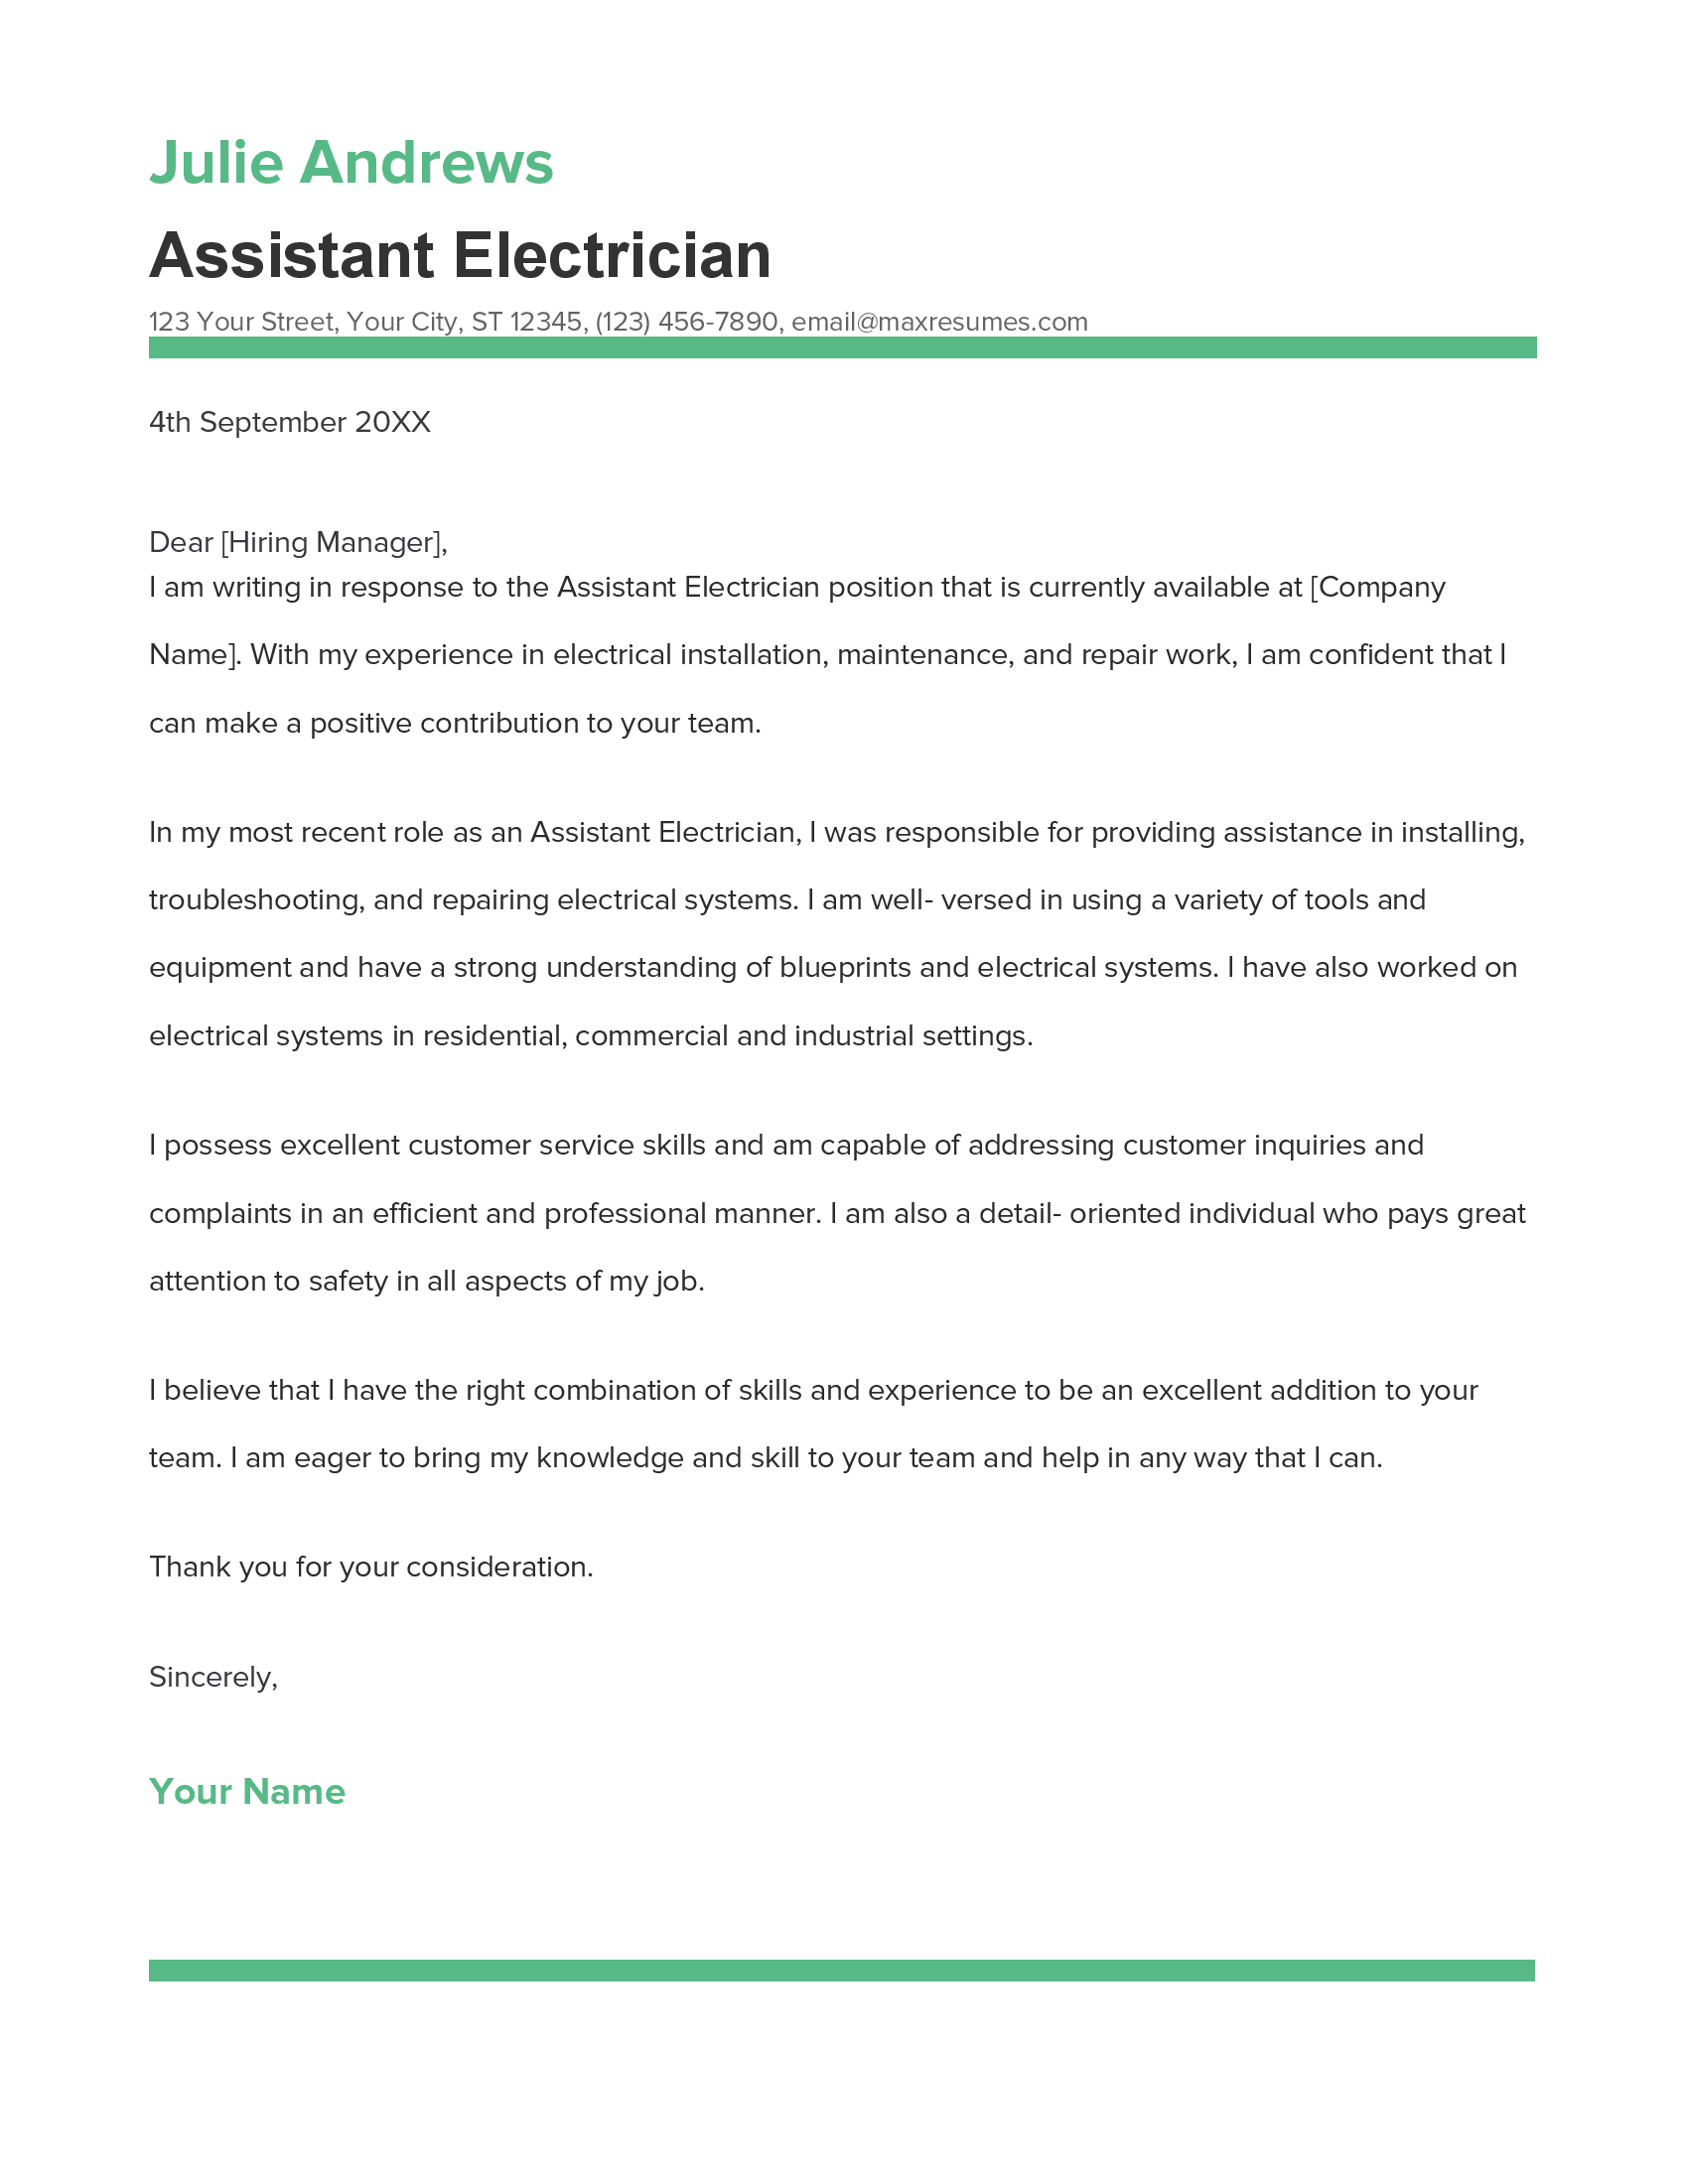 Assistant Electrician Cover Letter Example